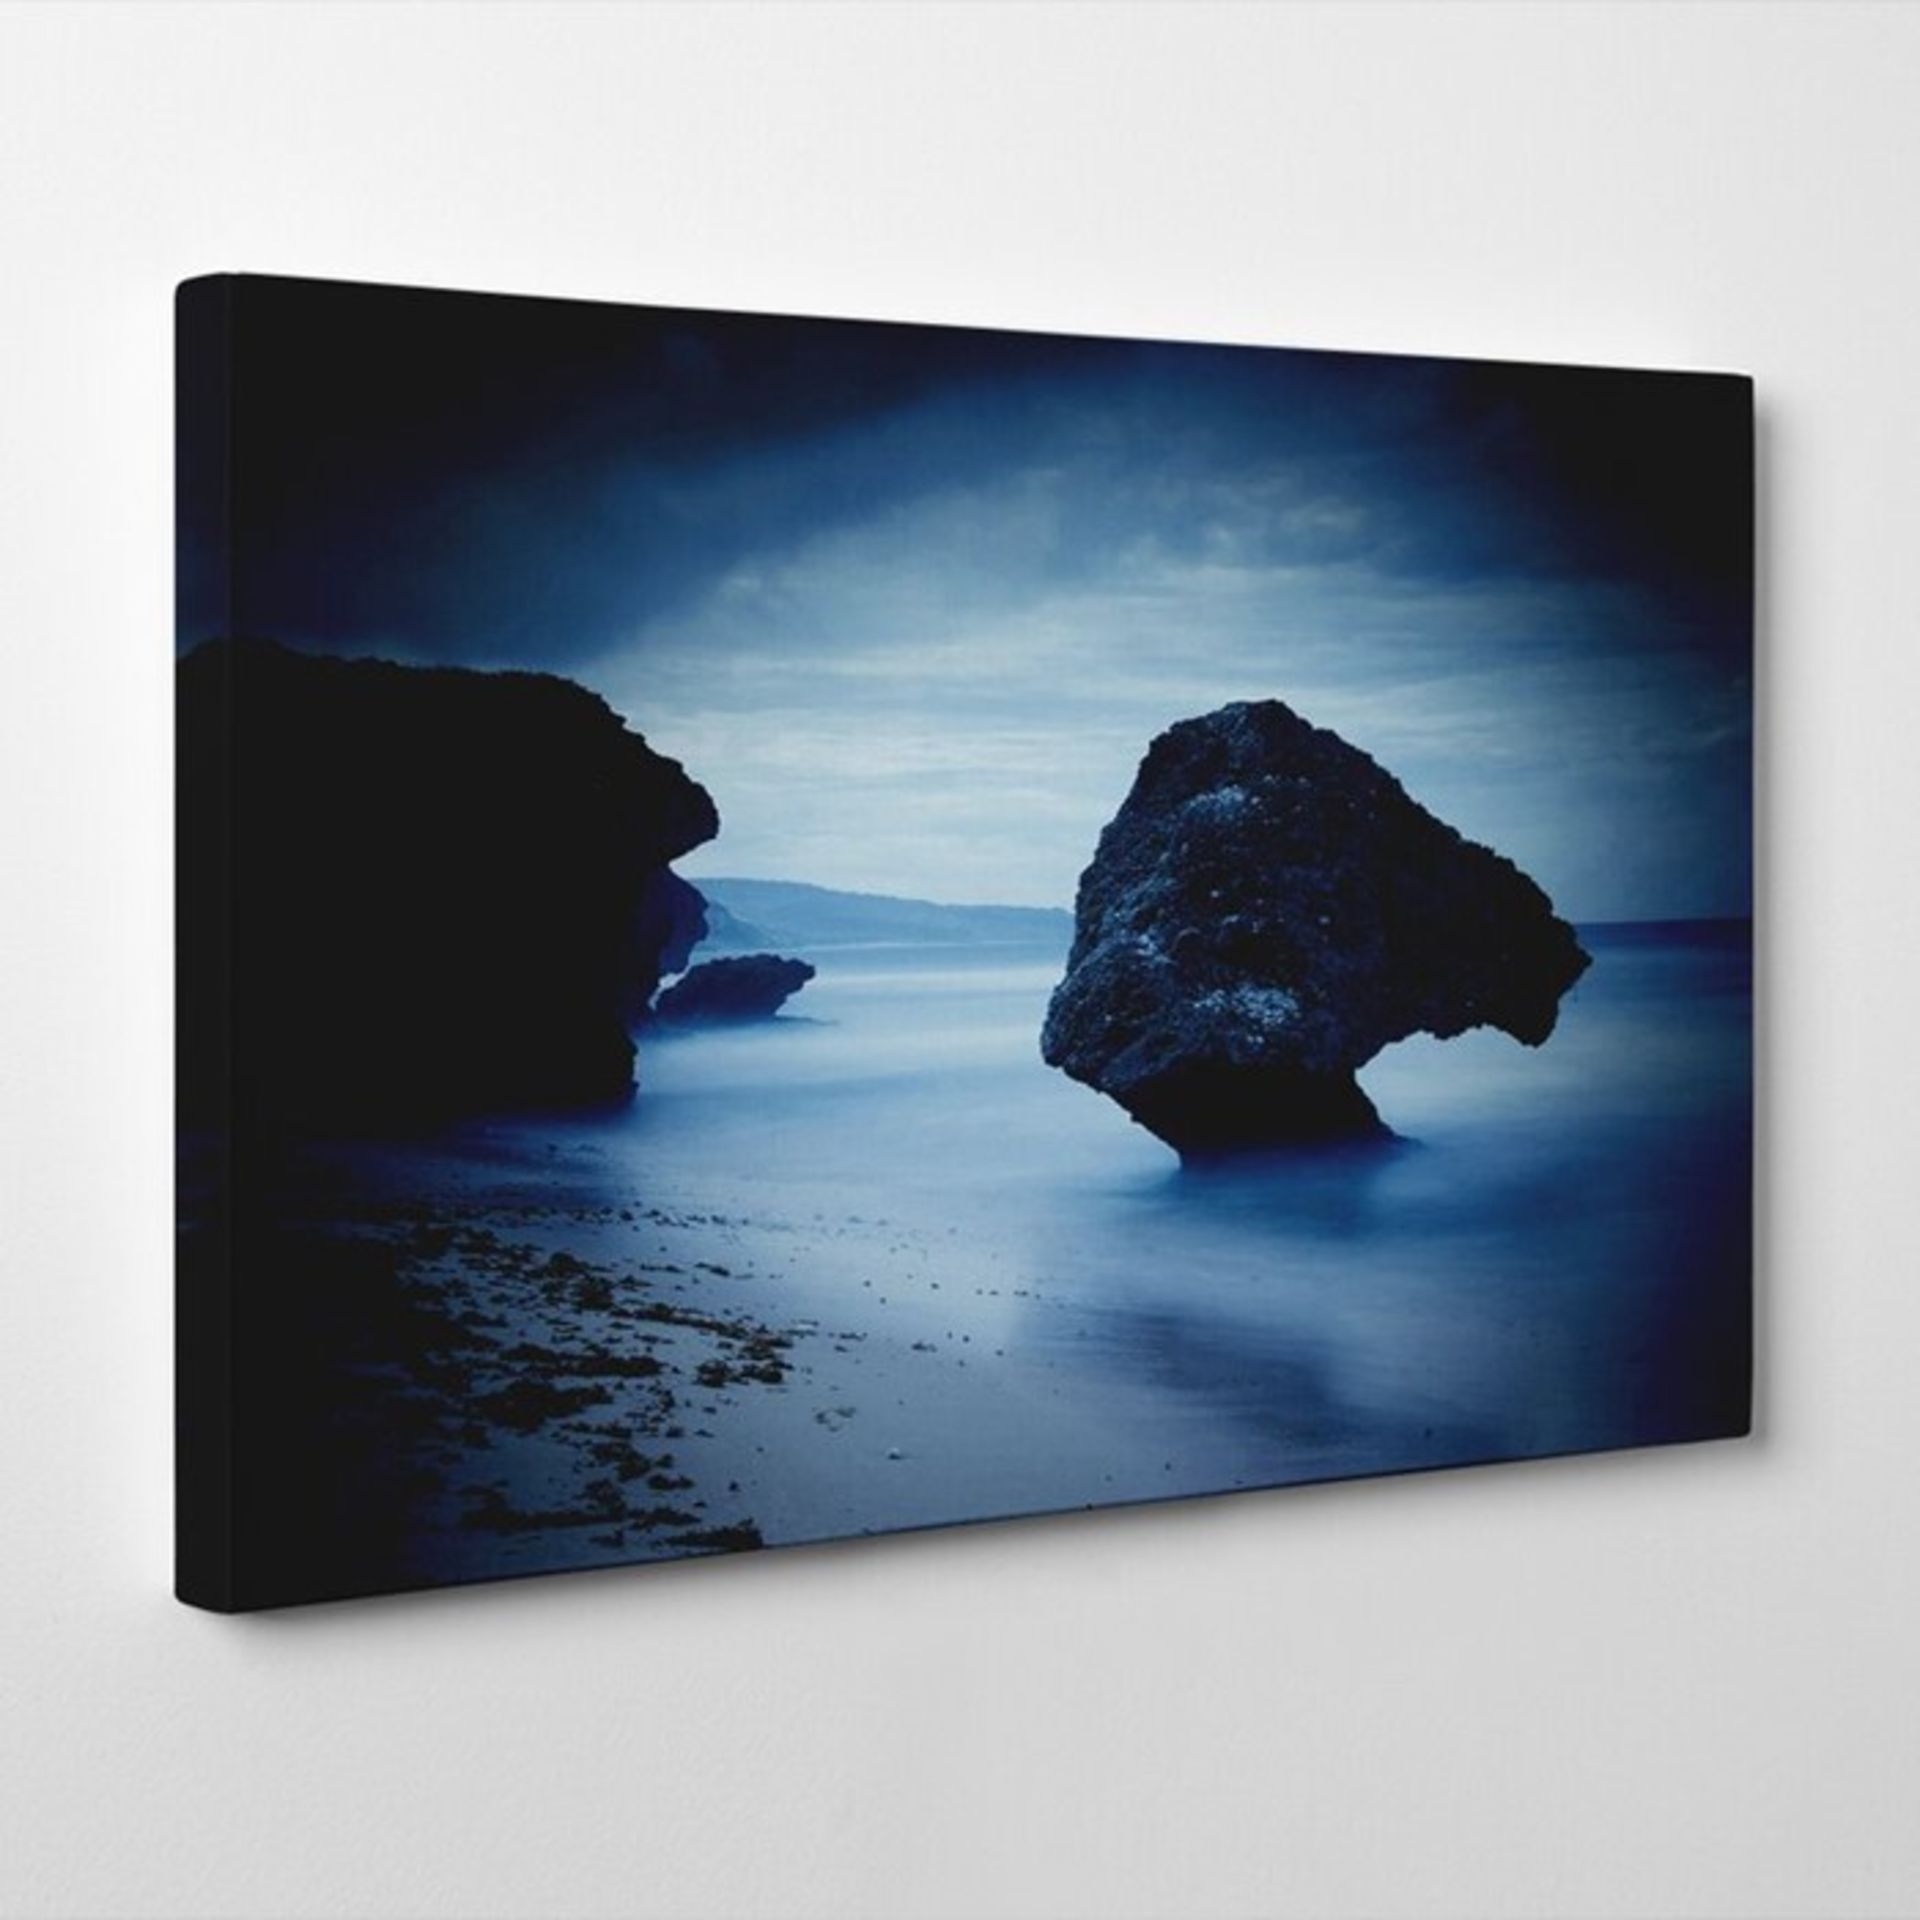 East Urban Home, Seascape Barbados Beach Photographic Print on Canvas - RRP £33.99 (JKT97103 -